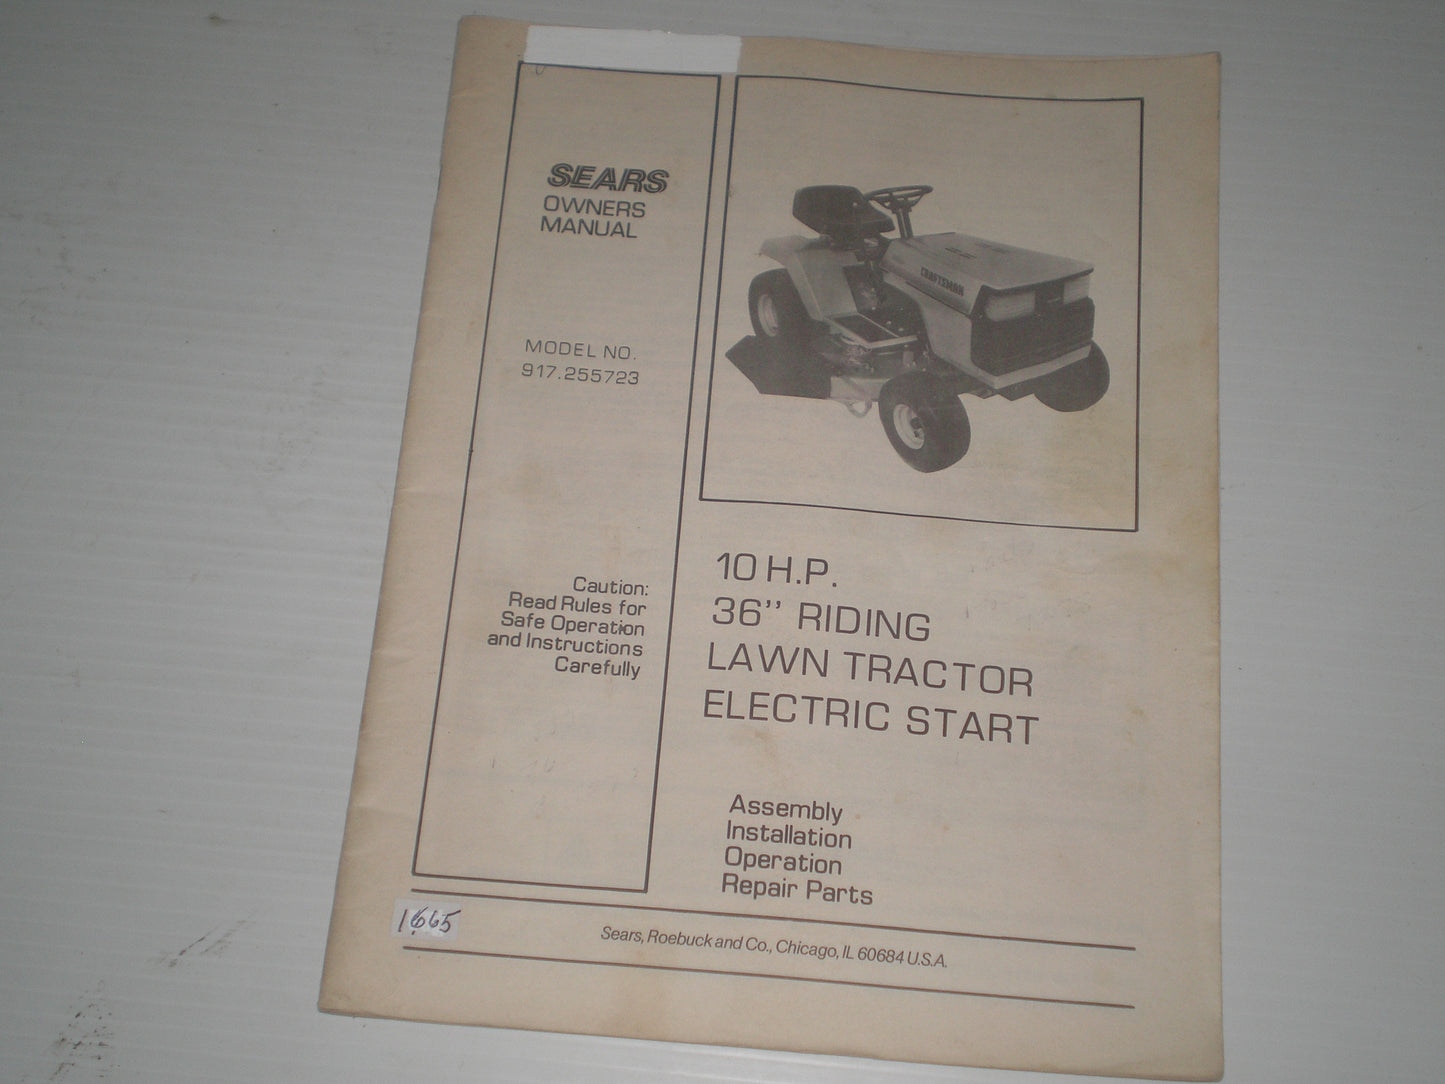 SEARS 10 HP  36" Riding Lawn Tractor Electric Start  Model # 917.255723  Owner's Manual  #1665